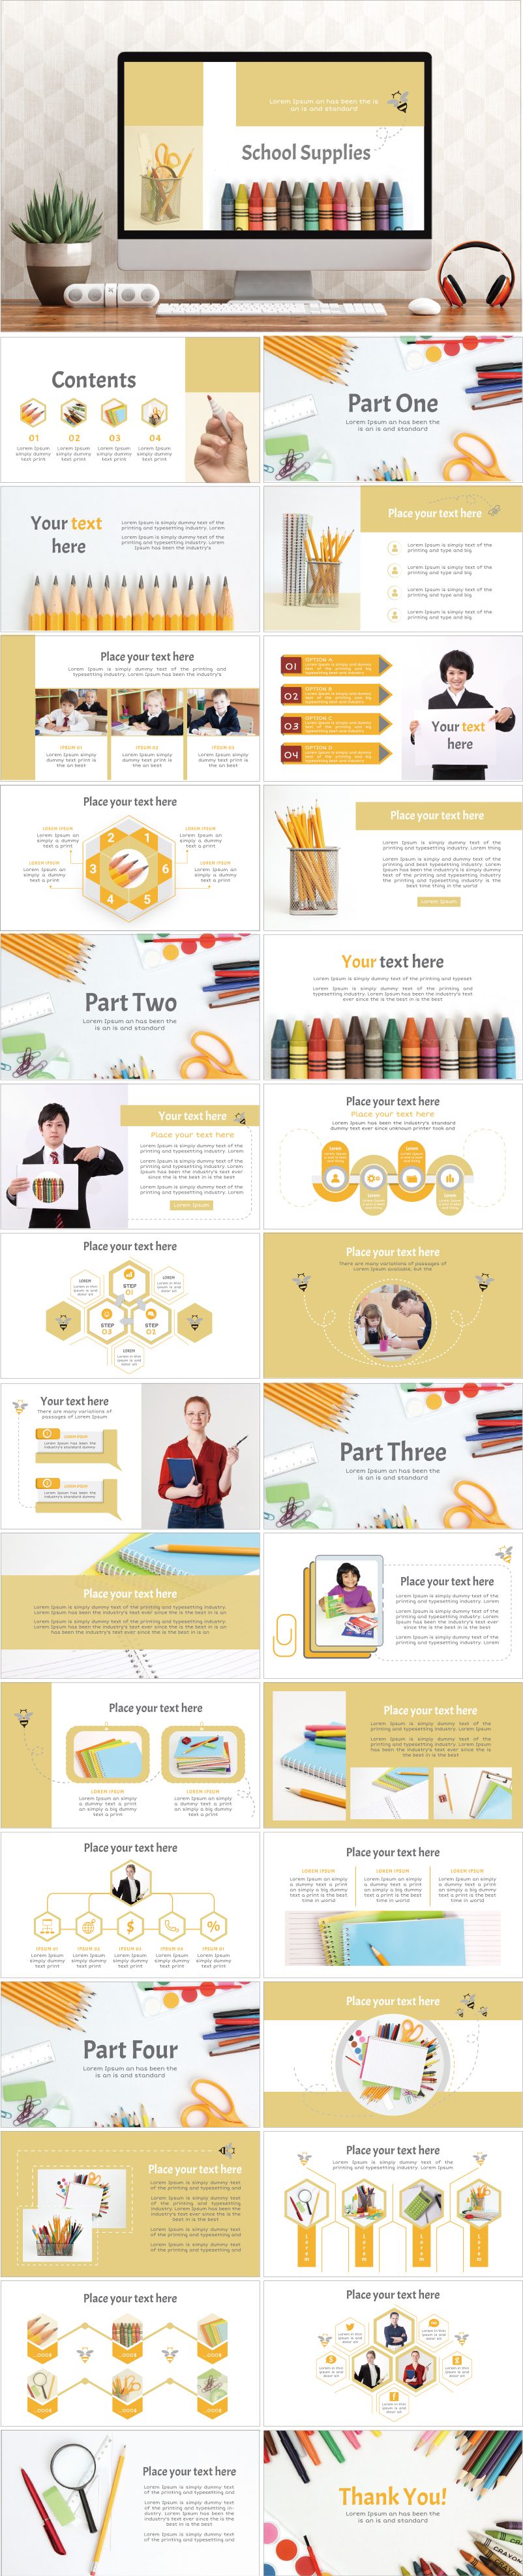 PowerPoint template vol.31